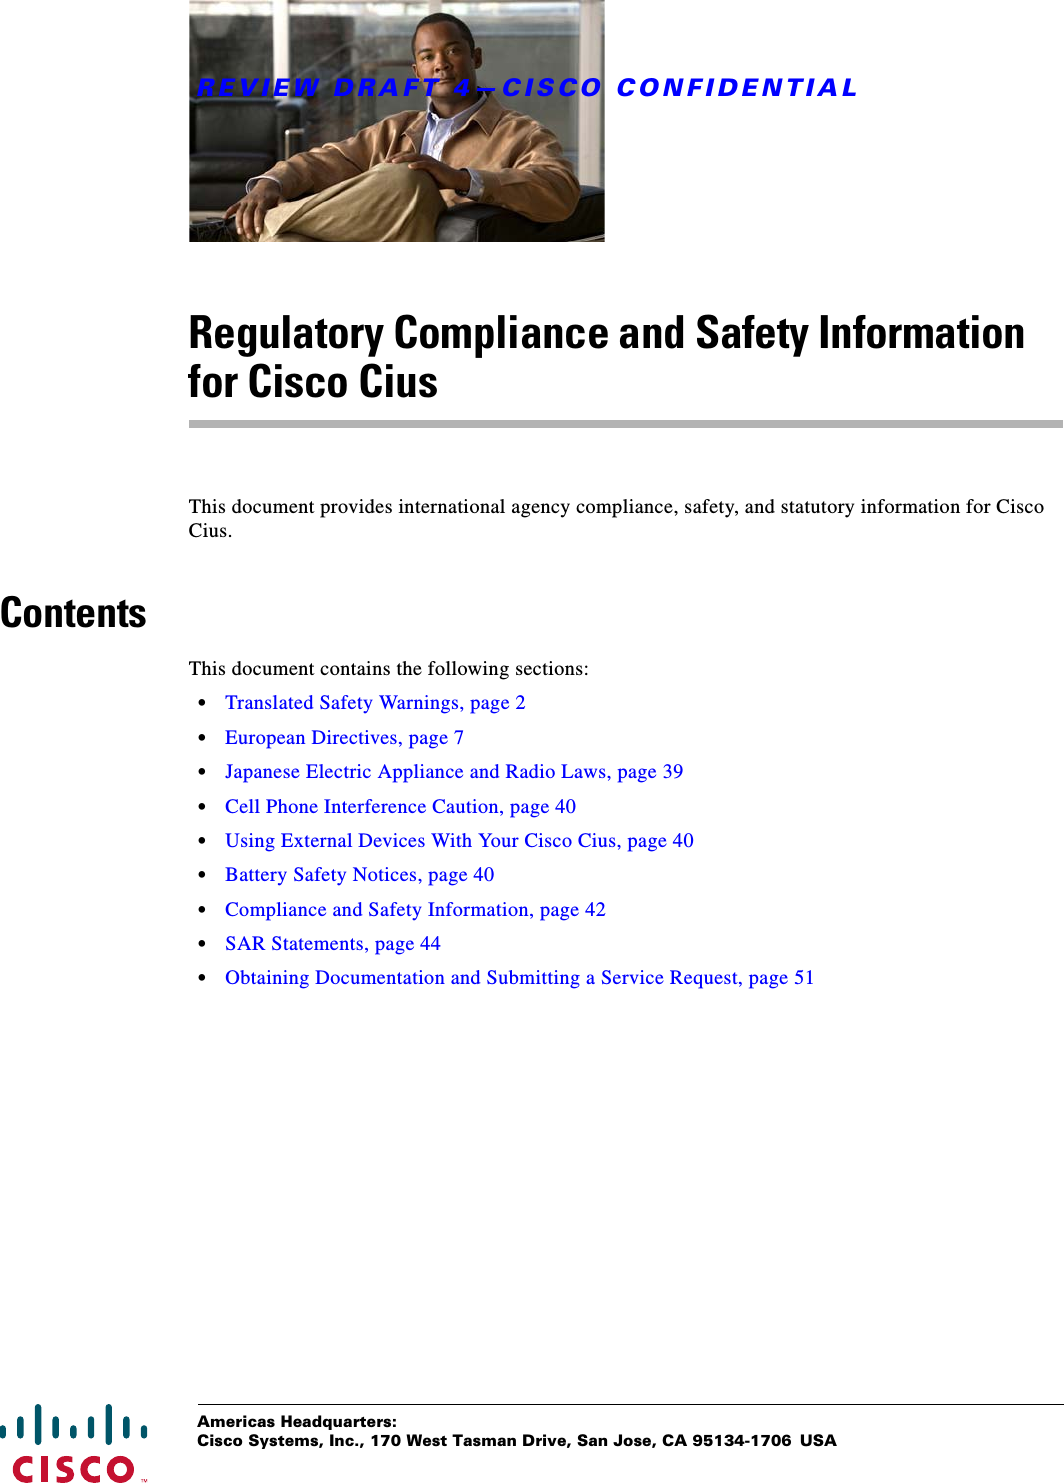 REVIEW DRAFT 4—CISCO CONFIDENTIALAmericas Headquarters:Cisco Systems, Inc., 170 West Tasman Drive, San Jose, CA 95134-1706 USARegulatory Compliance and Safety Information for Cisco CiusThis document provides international agency compliance, safety, and statutory information for Cisco Cius.ContentsThis document contains the following sections: • Translated Safety Warnings, page 2 • European Directives, page 7 • Japanese Electric Appliance and Radio Laws, page 39 • Cell Phone Interference Caution, page 40 • Using External Devices With Your Cisco Cius, page 40 • Battery Safety Notices, page 40 • Compliance and Safety Information, page 42 • SAR Statements, page 44 • Obtaining Documentation and Submitting a Service Request, page 51